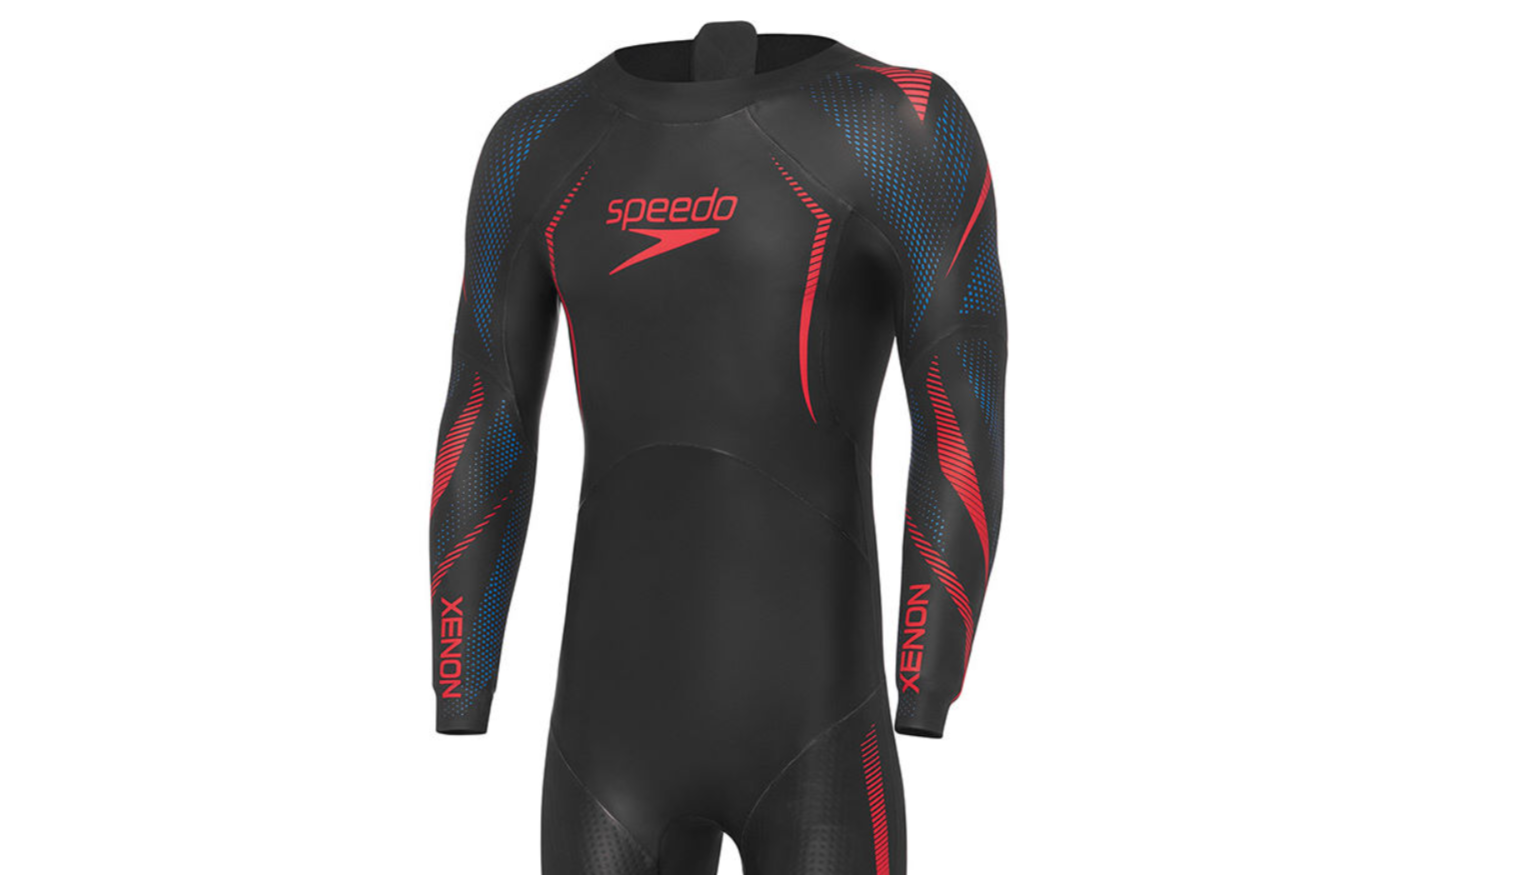 Shh, Wiggle extra 15% OFF on  extra 10% OFF on Speedo wetsuits with discount code